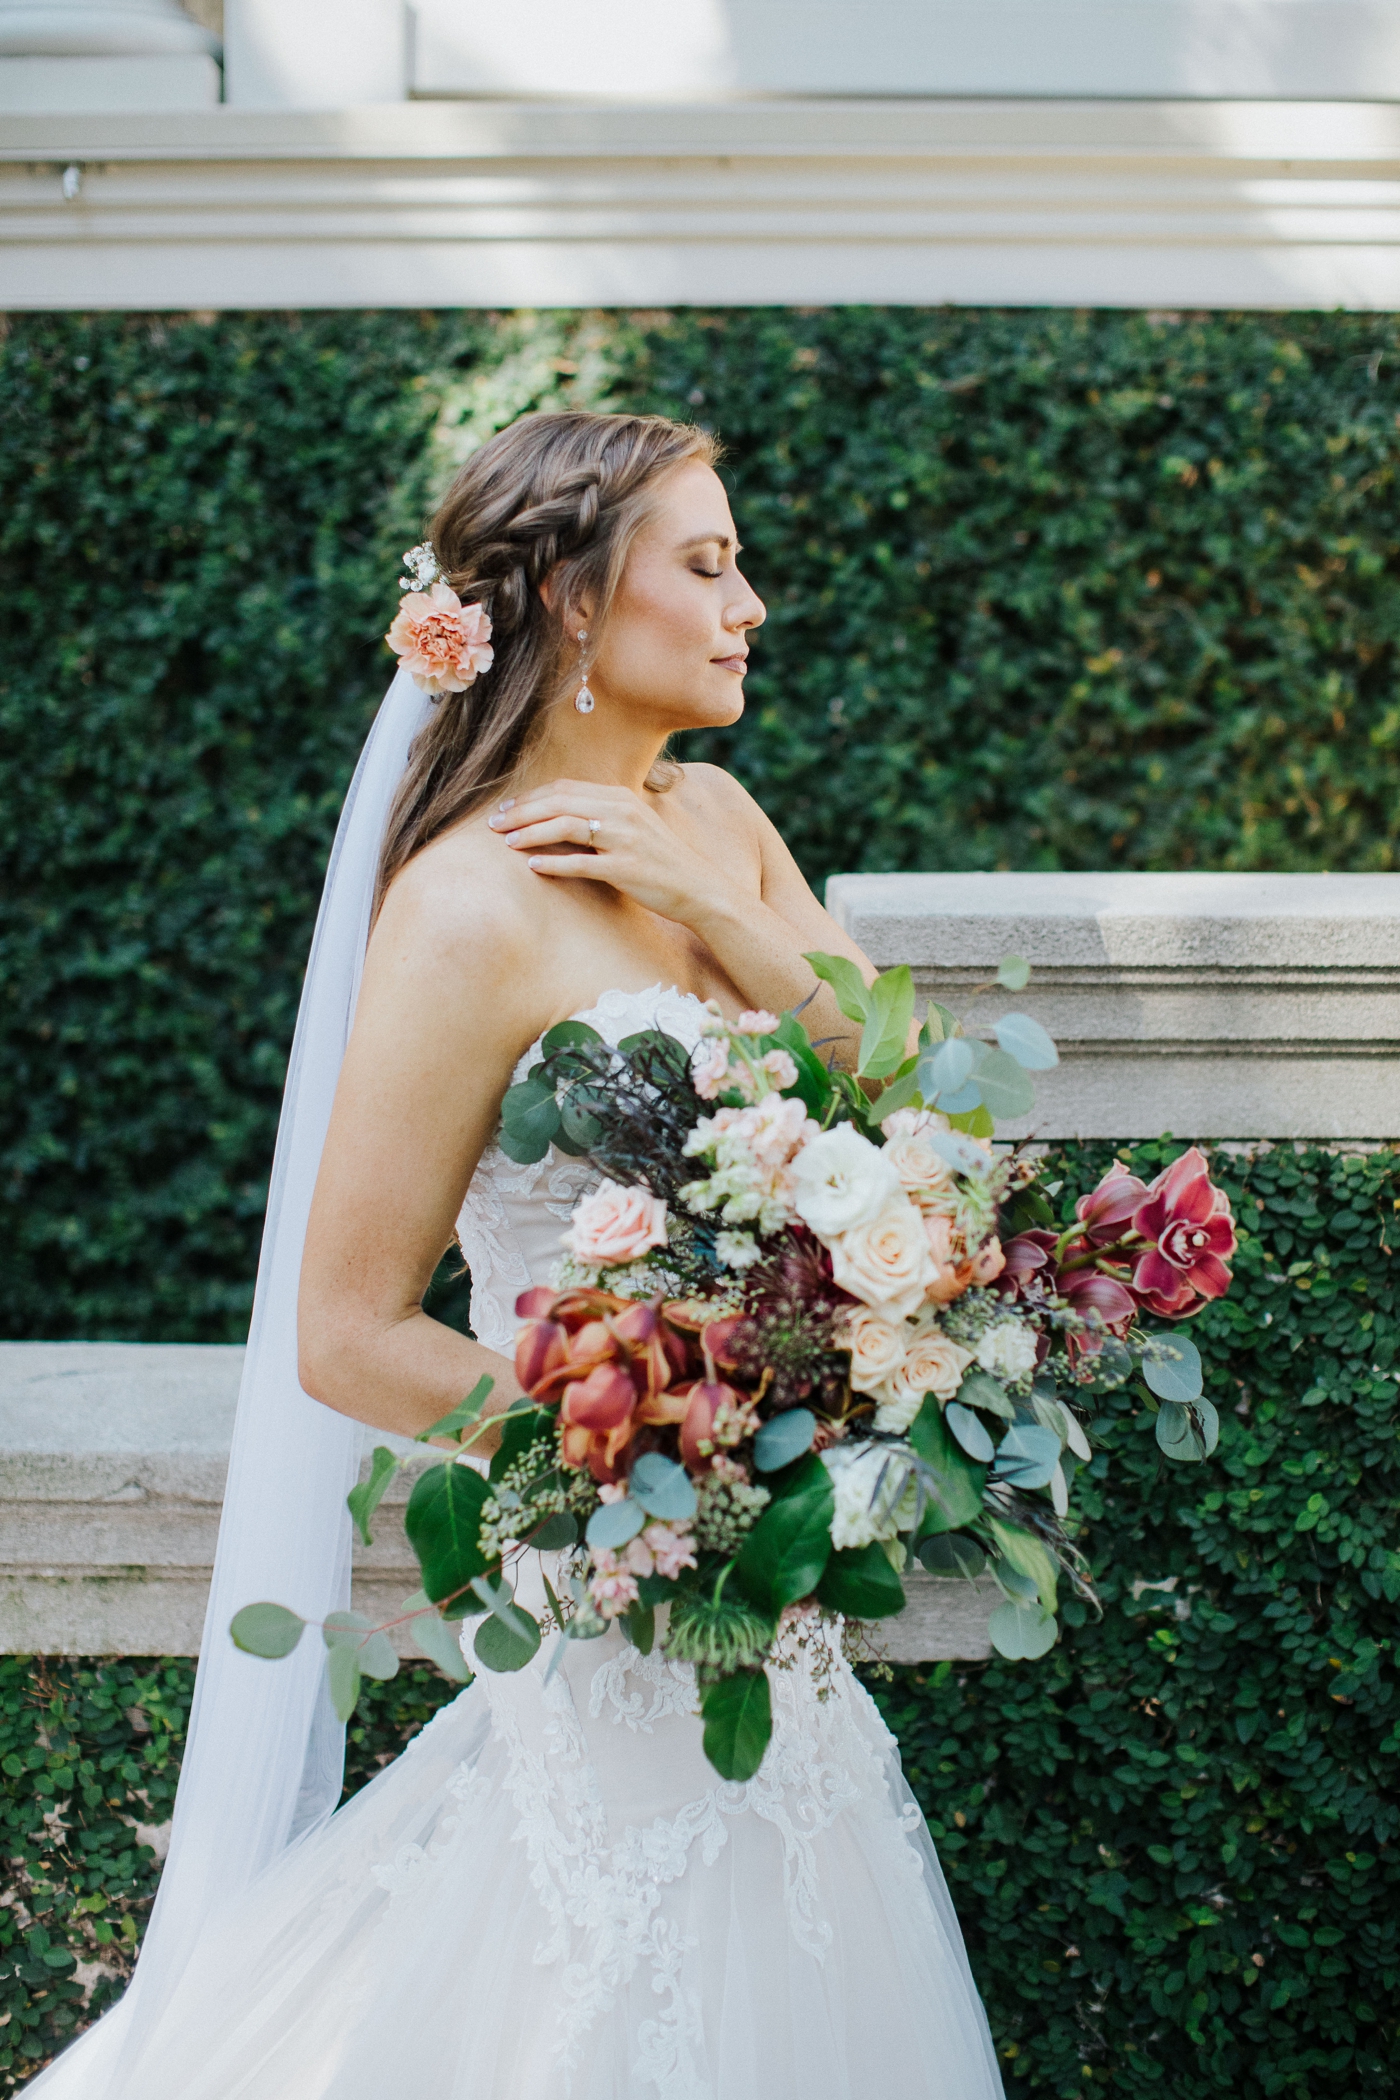 Large bouquet by Ivory and Beau at Ashley’s Bridal Portraits in Downtown Savannah | Izzy and Co.